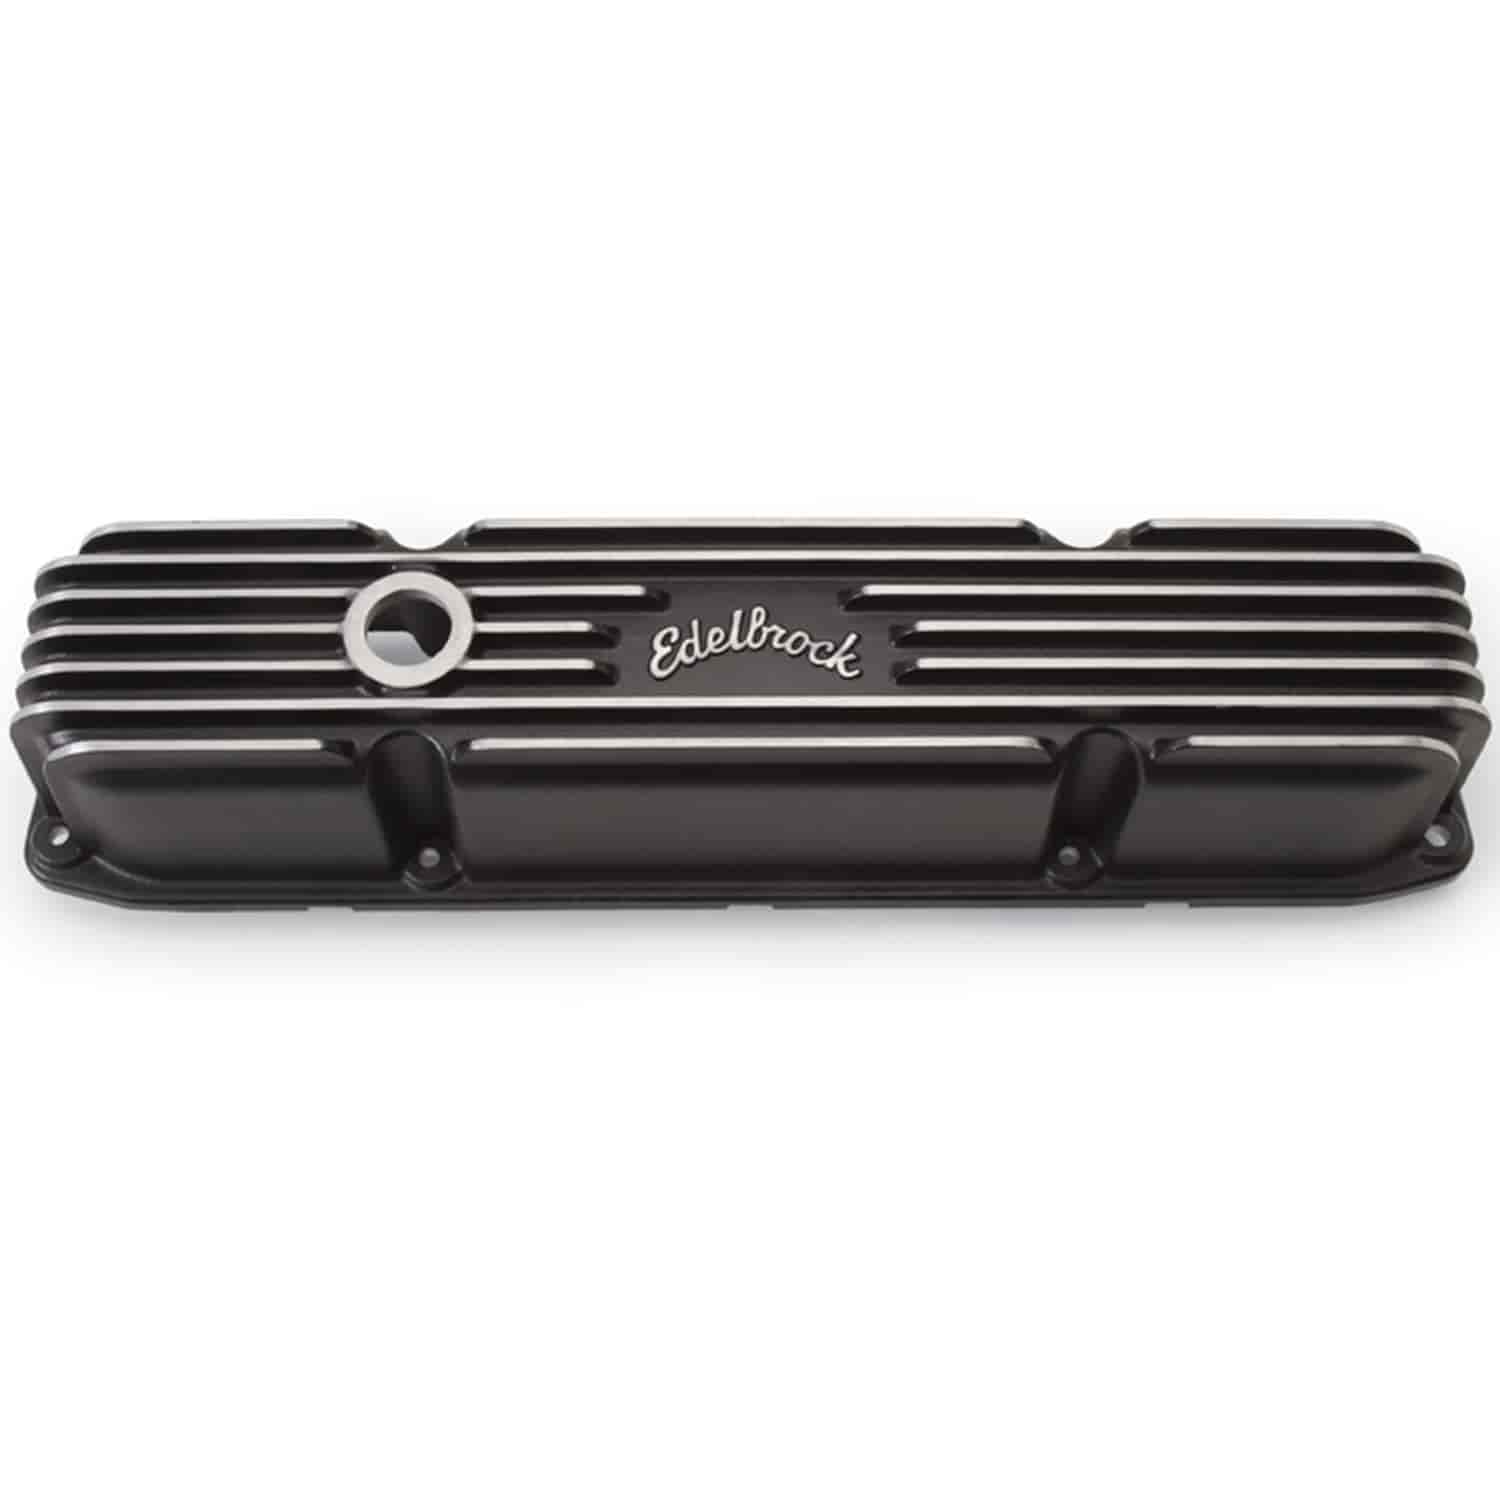 Classic Finned Valve Covers for Big Block Chrysler 383-440 with Black Powder Coated Finish